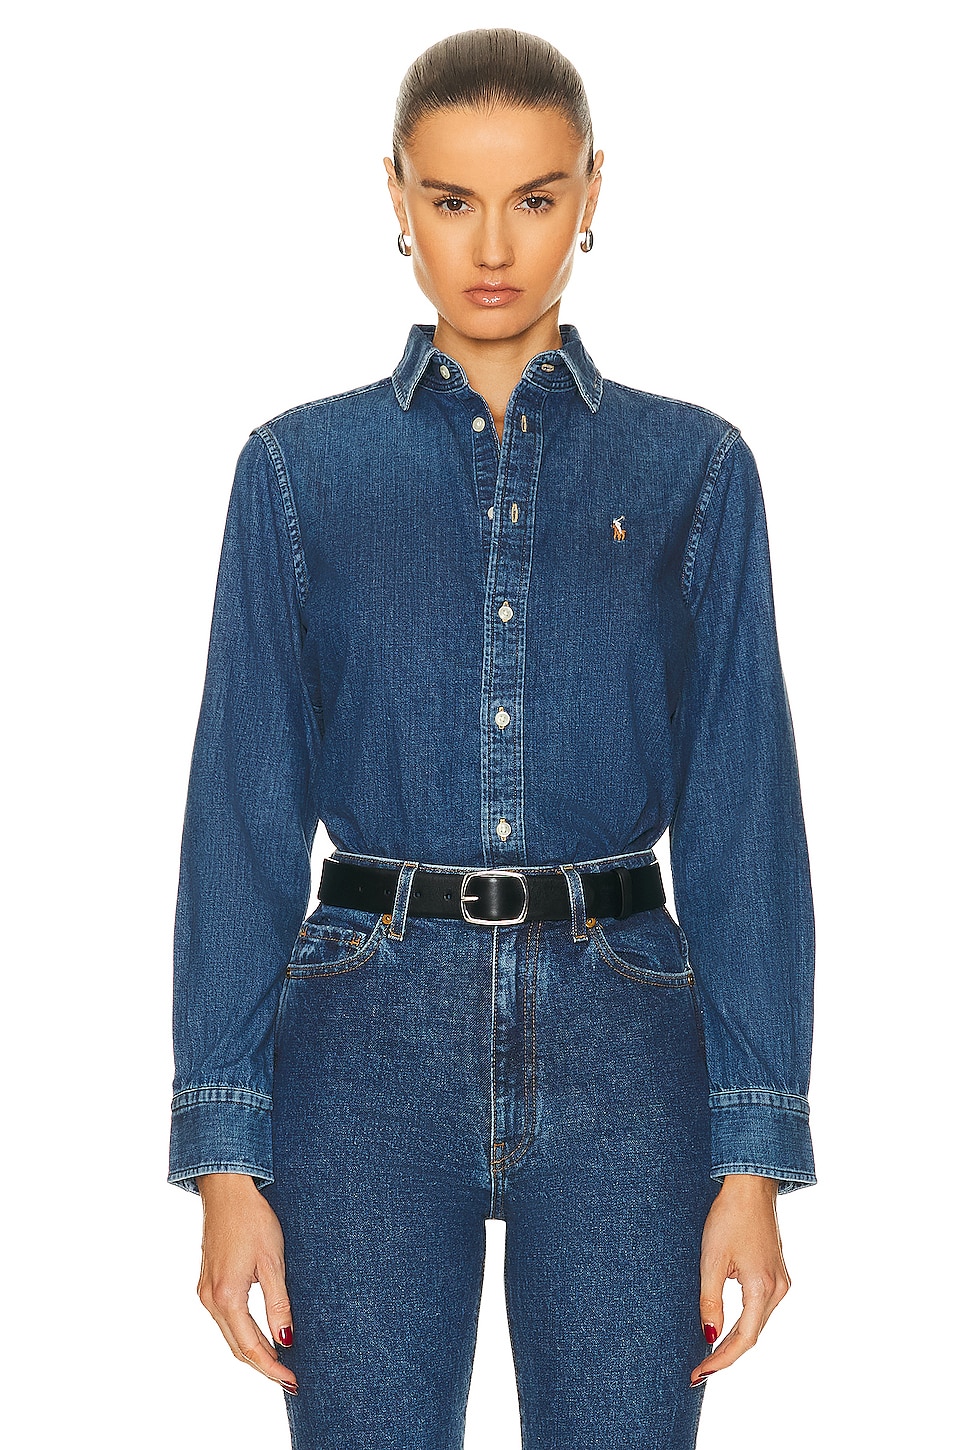 Image 1 of Polo Ralph Lauren Long Sleeve Button Up Shirt in Merced Wash